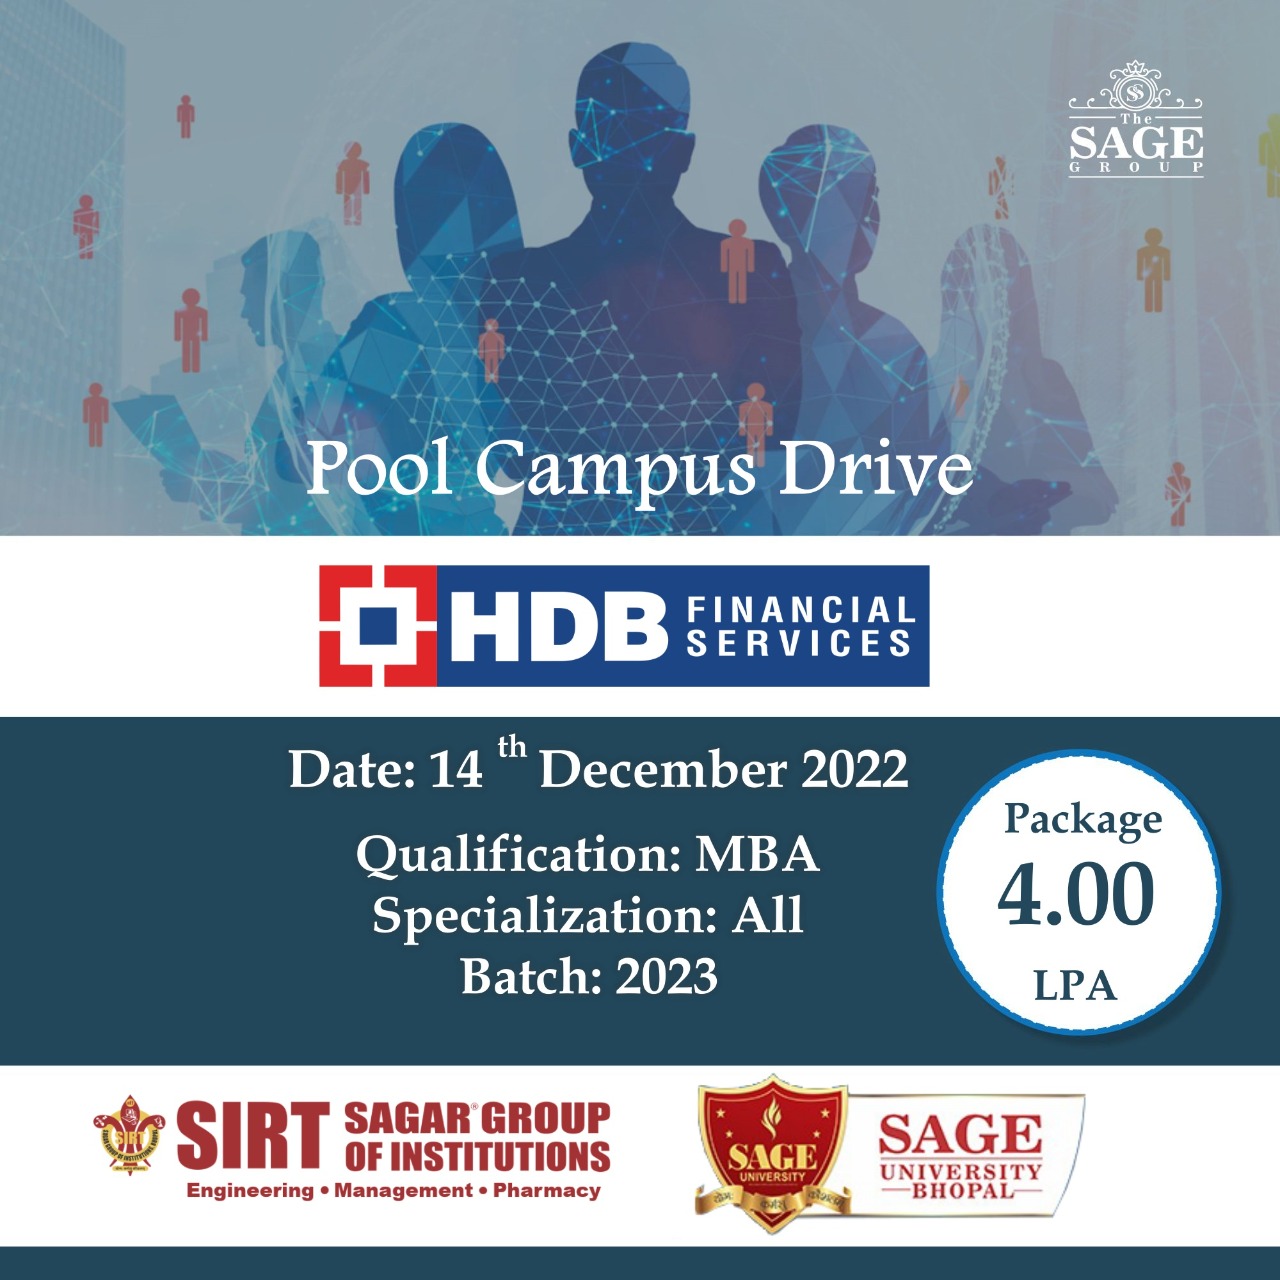 HDB FINANCIAL SERVICES, MBA, 2023, 2022-12-14